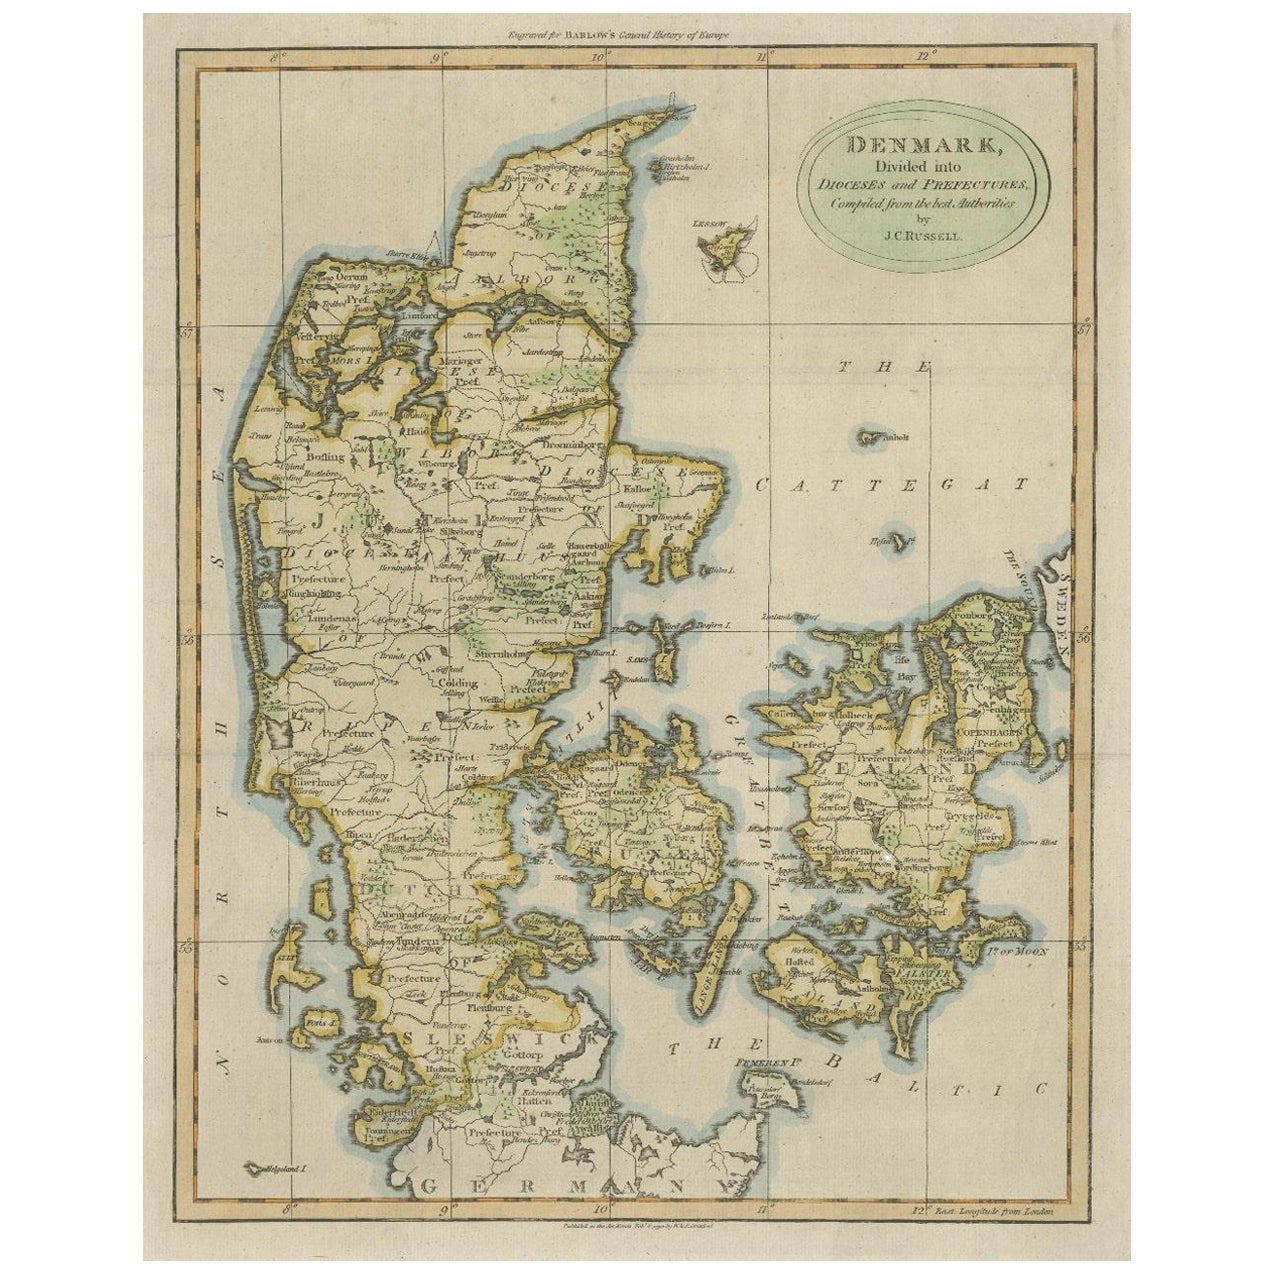 Antique Hand-Colored Engraved Map of Denmark, 1790